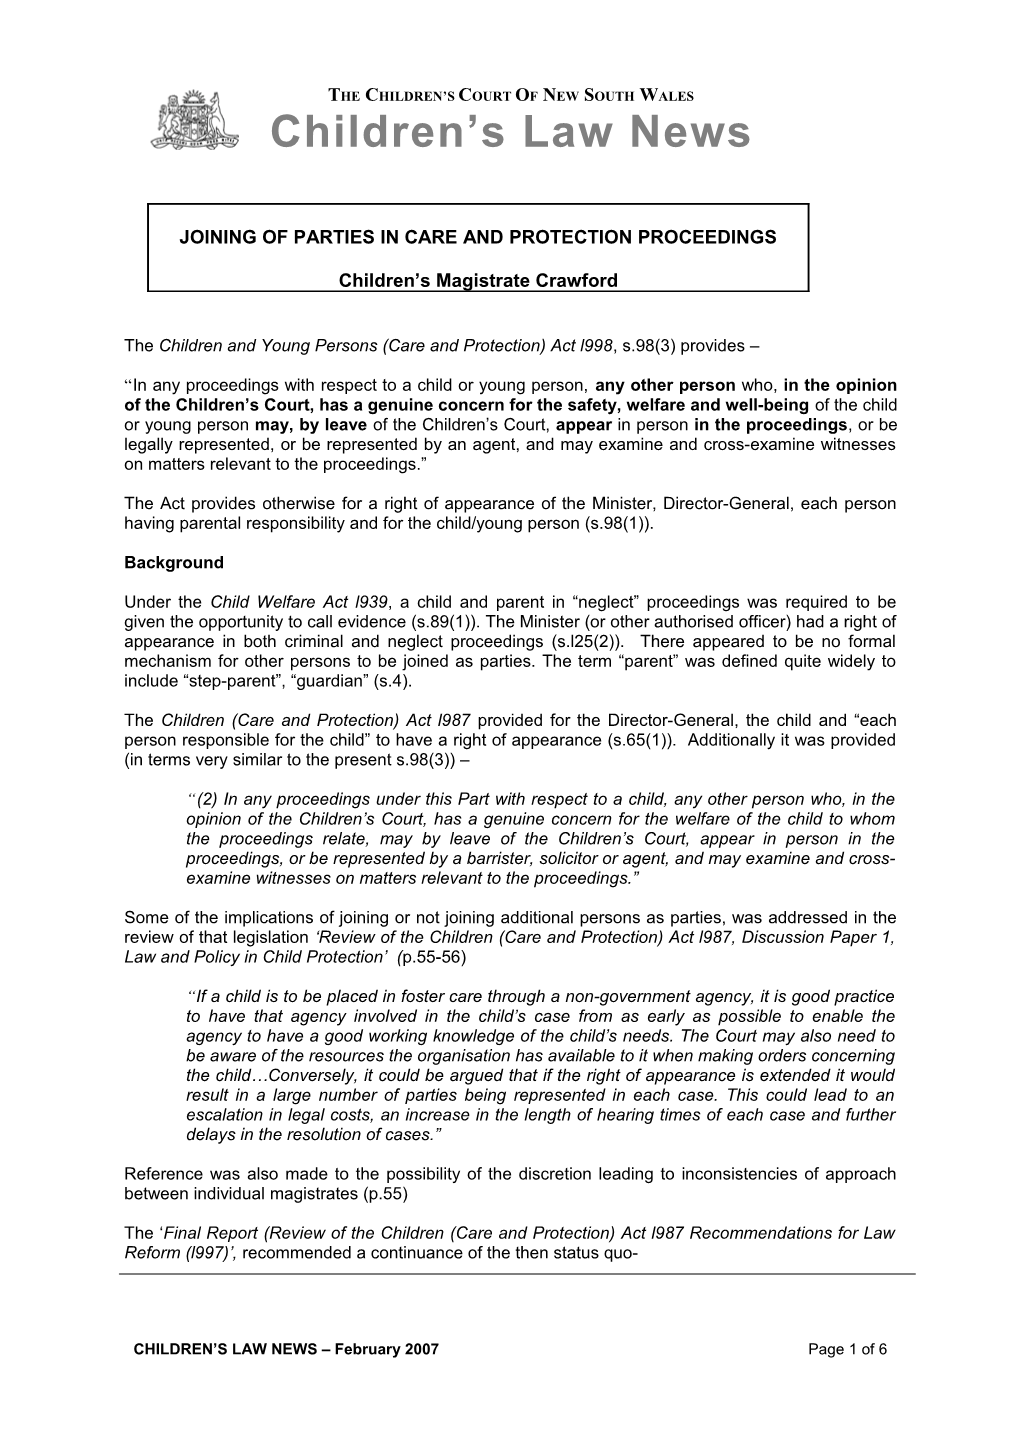 Joining of Parties in Care and Protection Proceedings